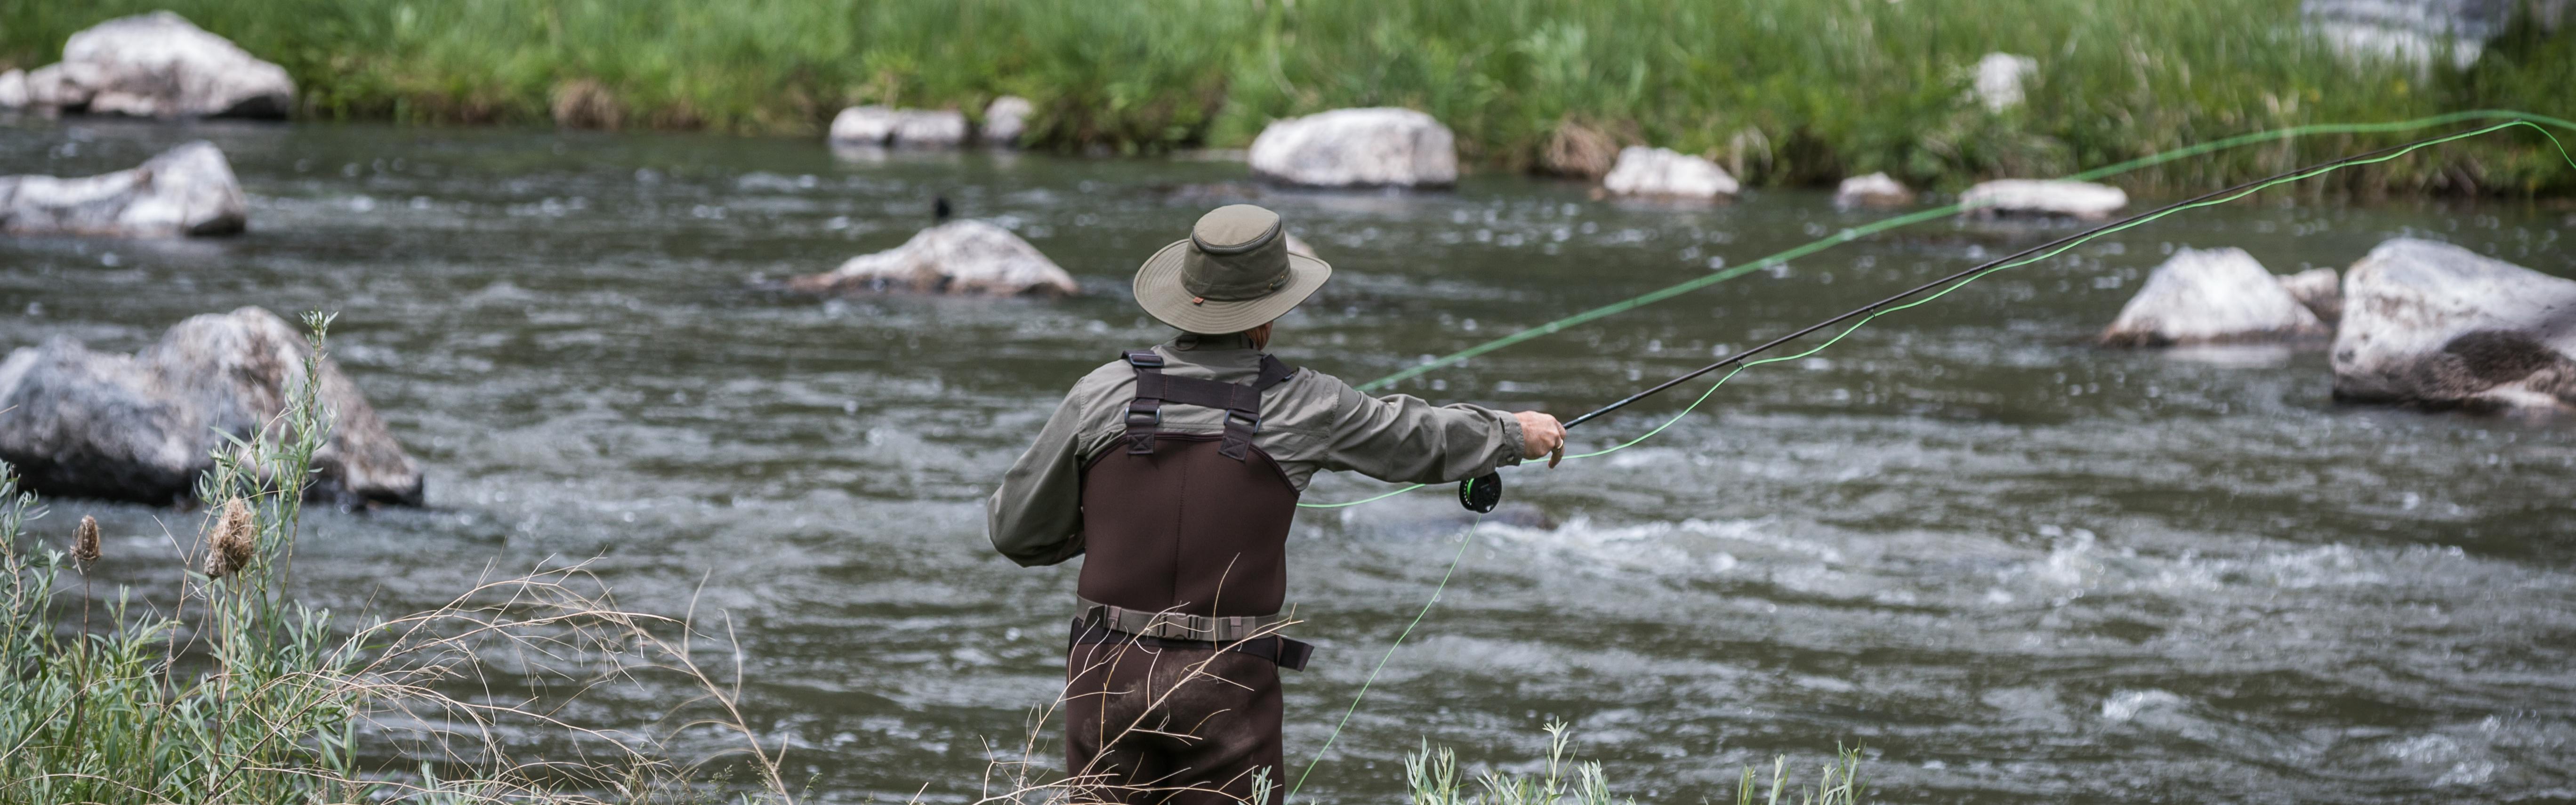 Best Fly Fishing Rods: Top 5 Poles Most Recommended By Experts